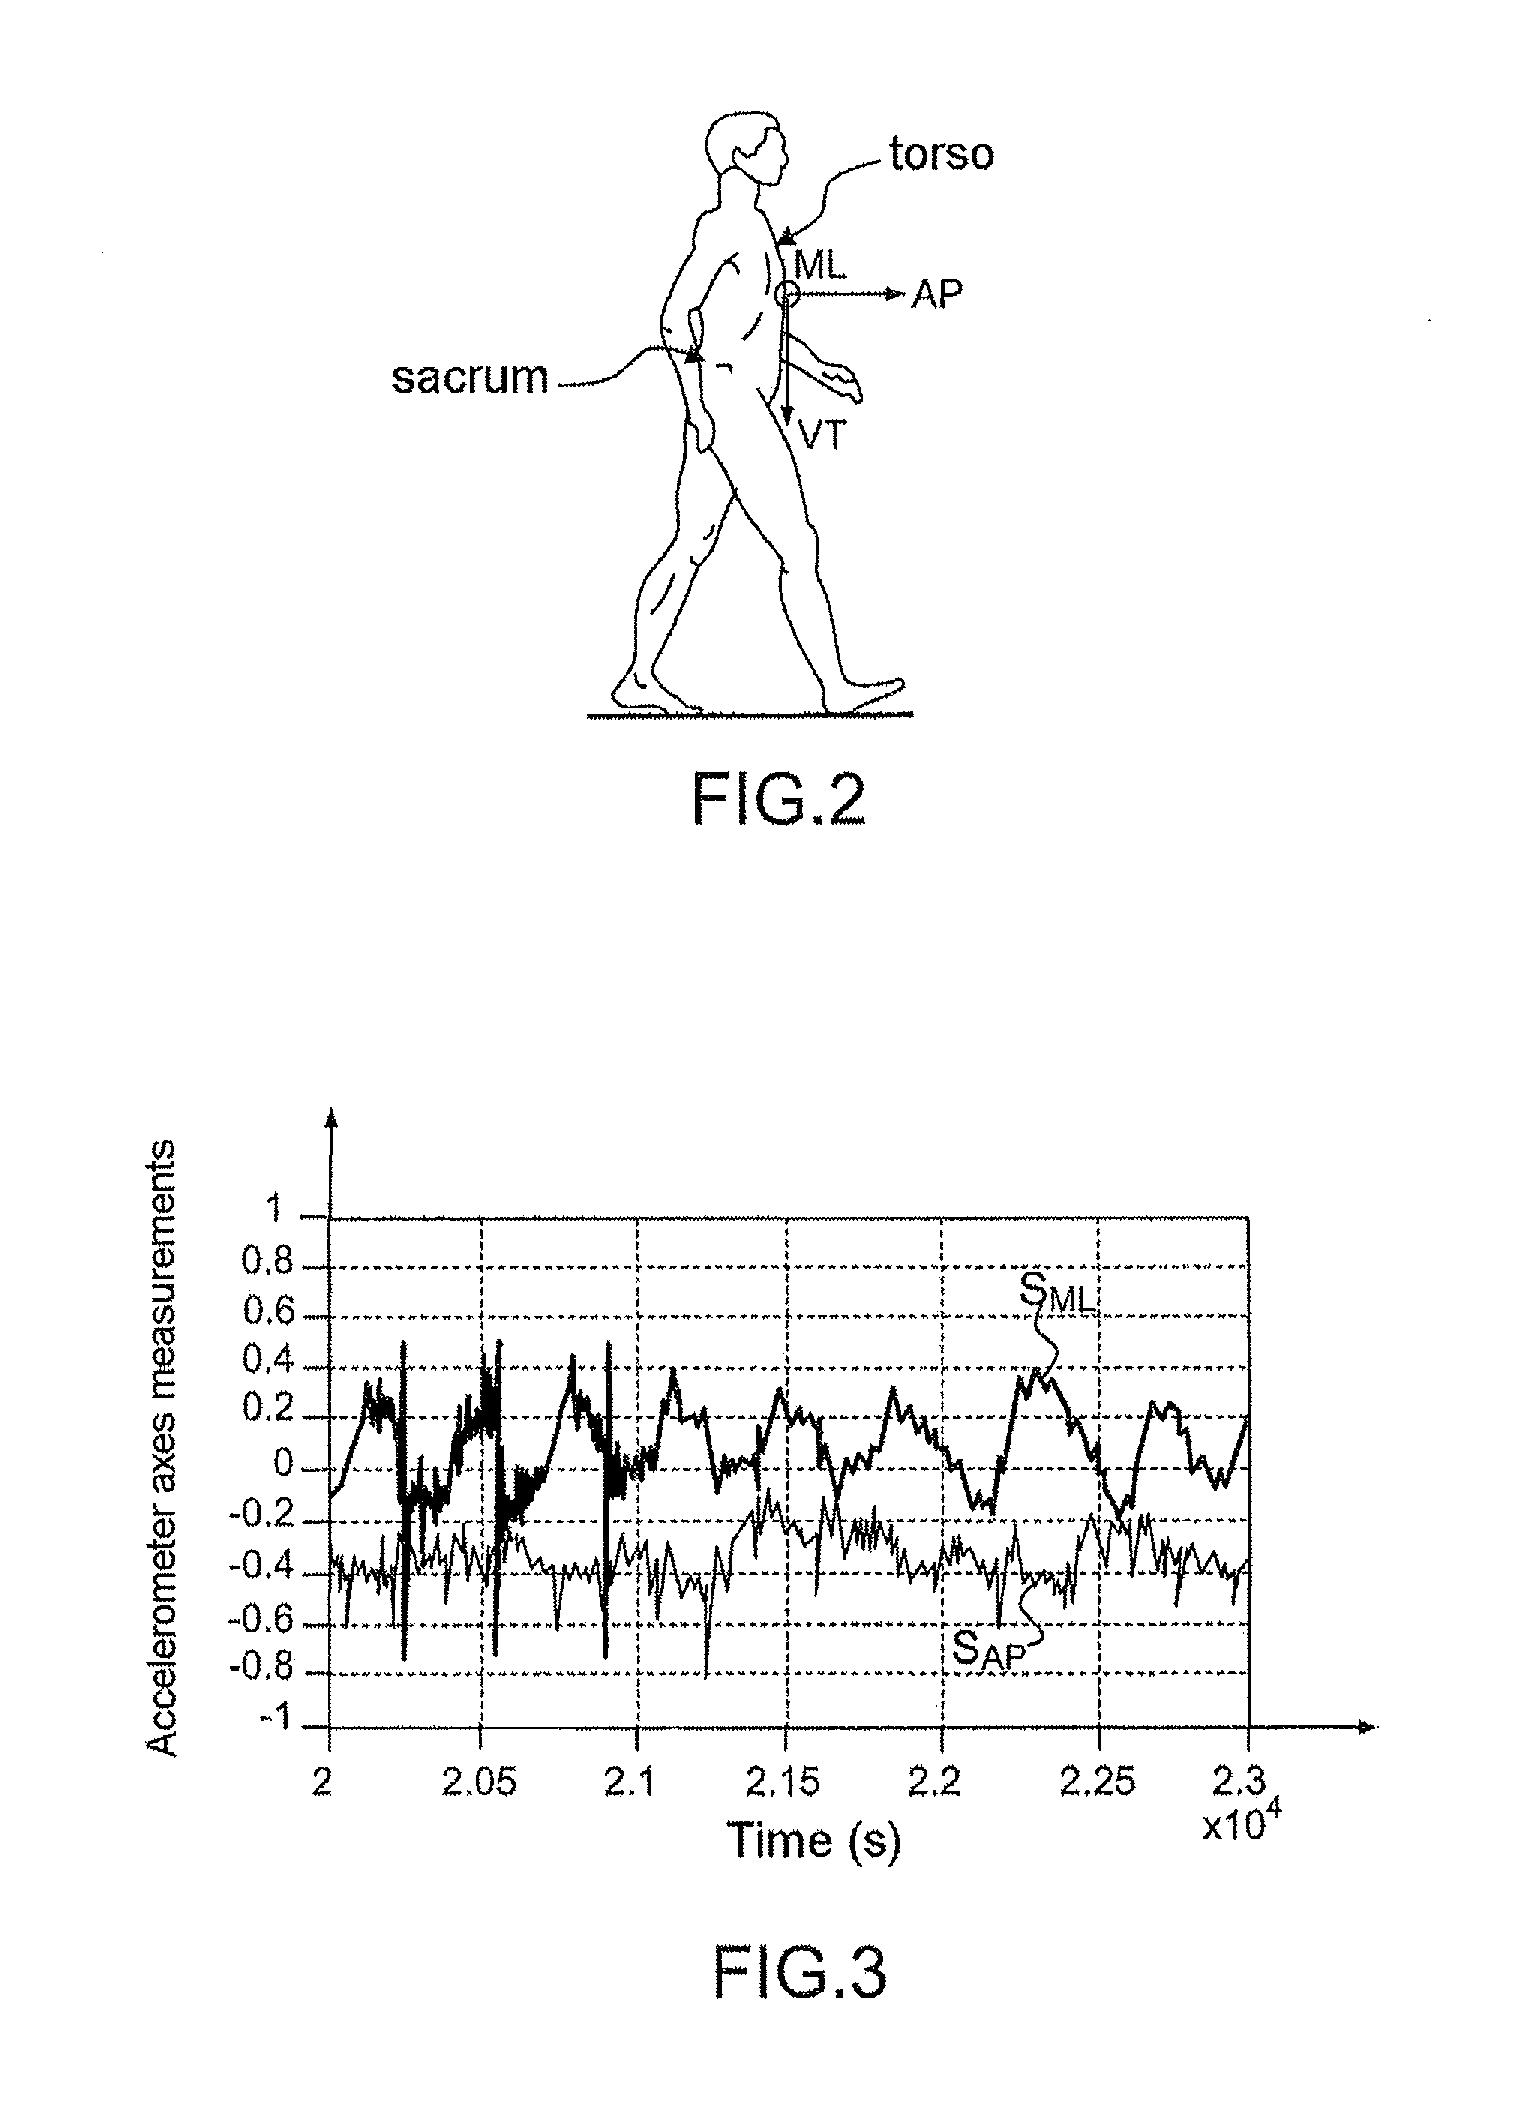 System and method for detecting the walk of a person